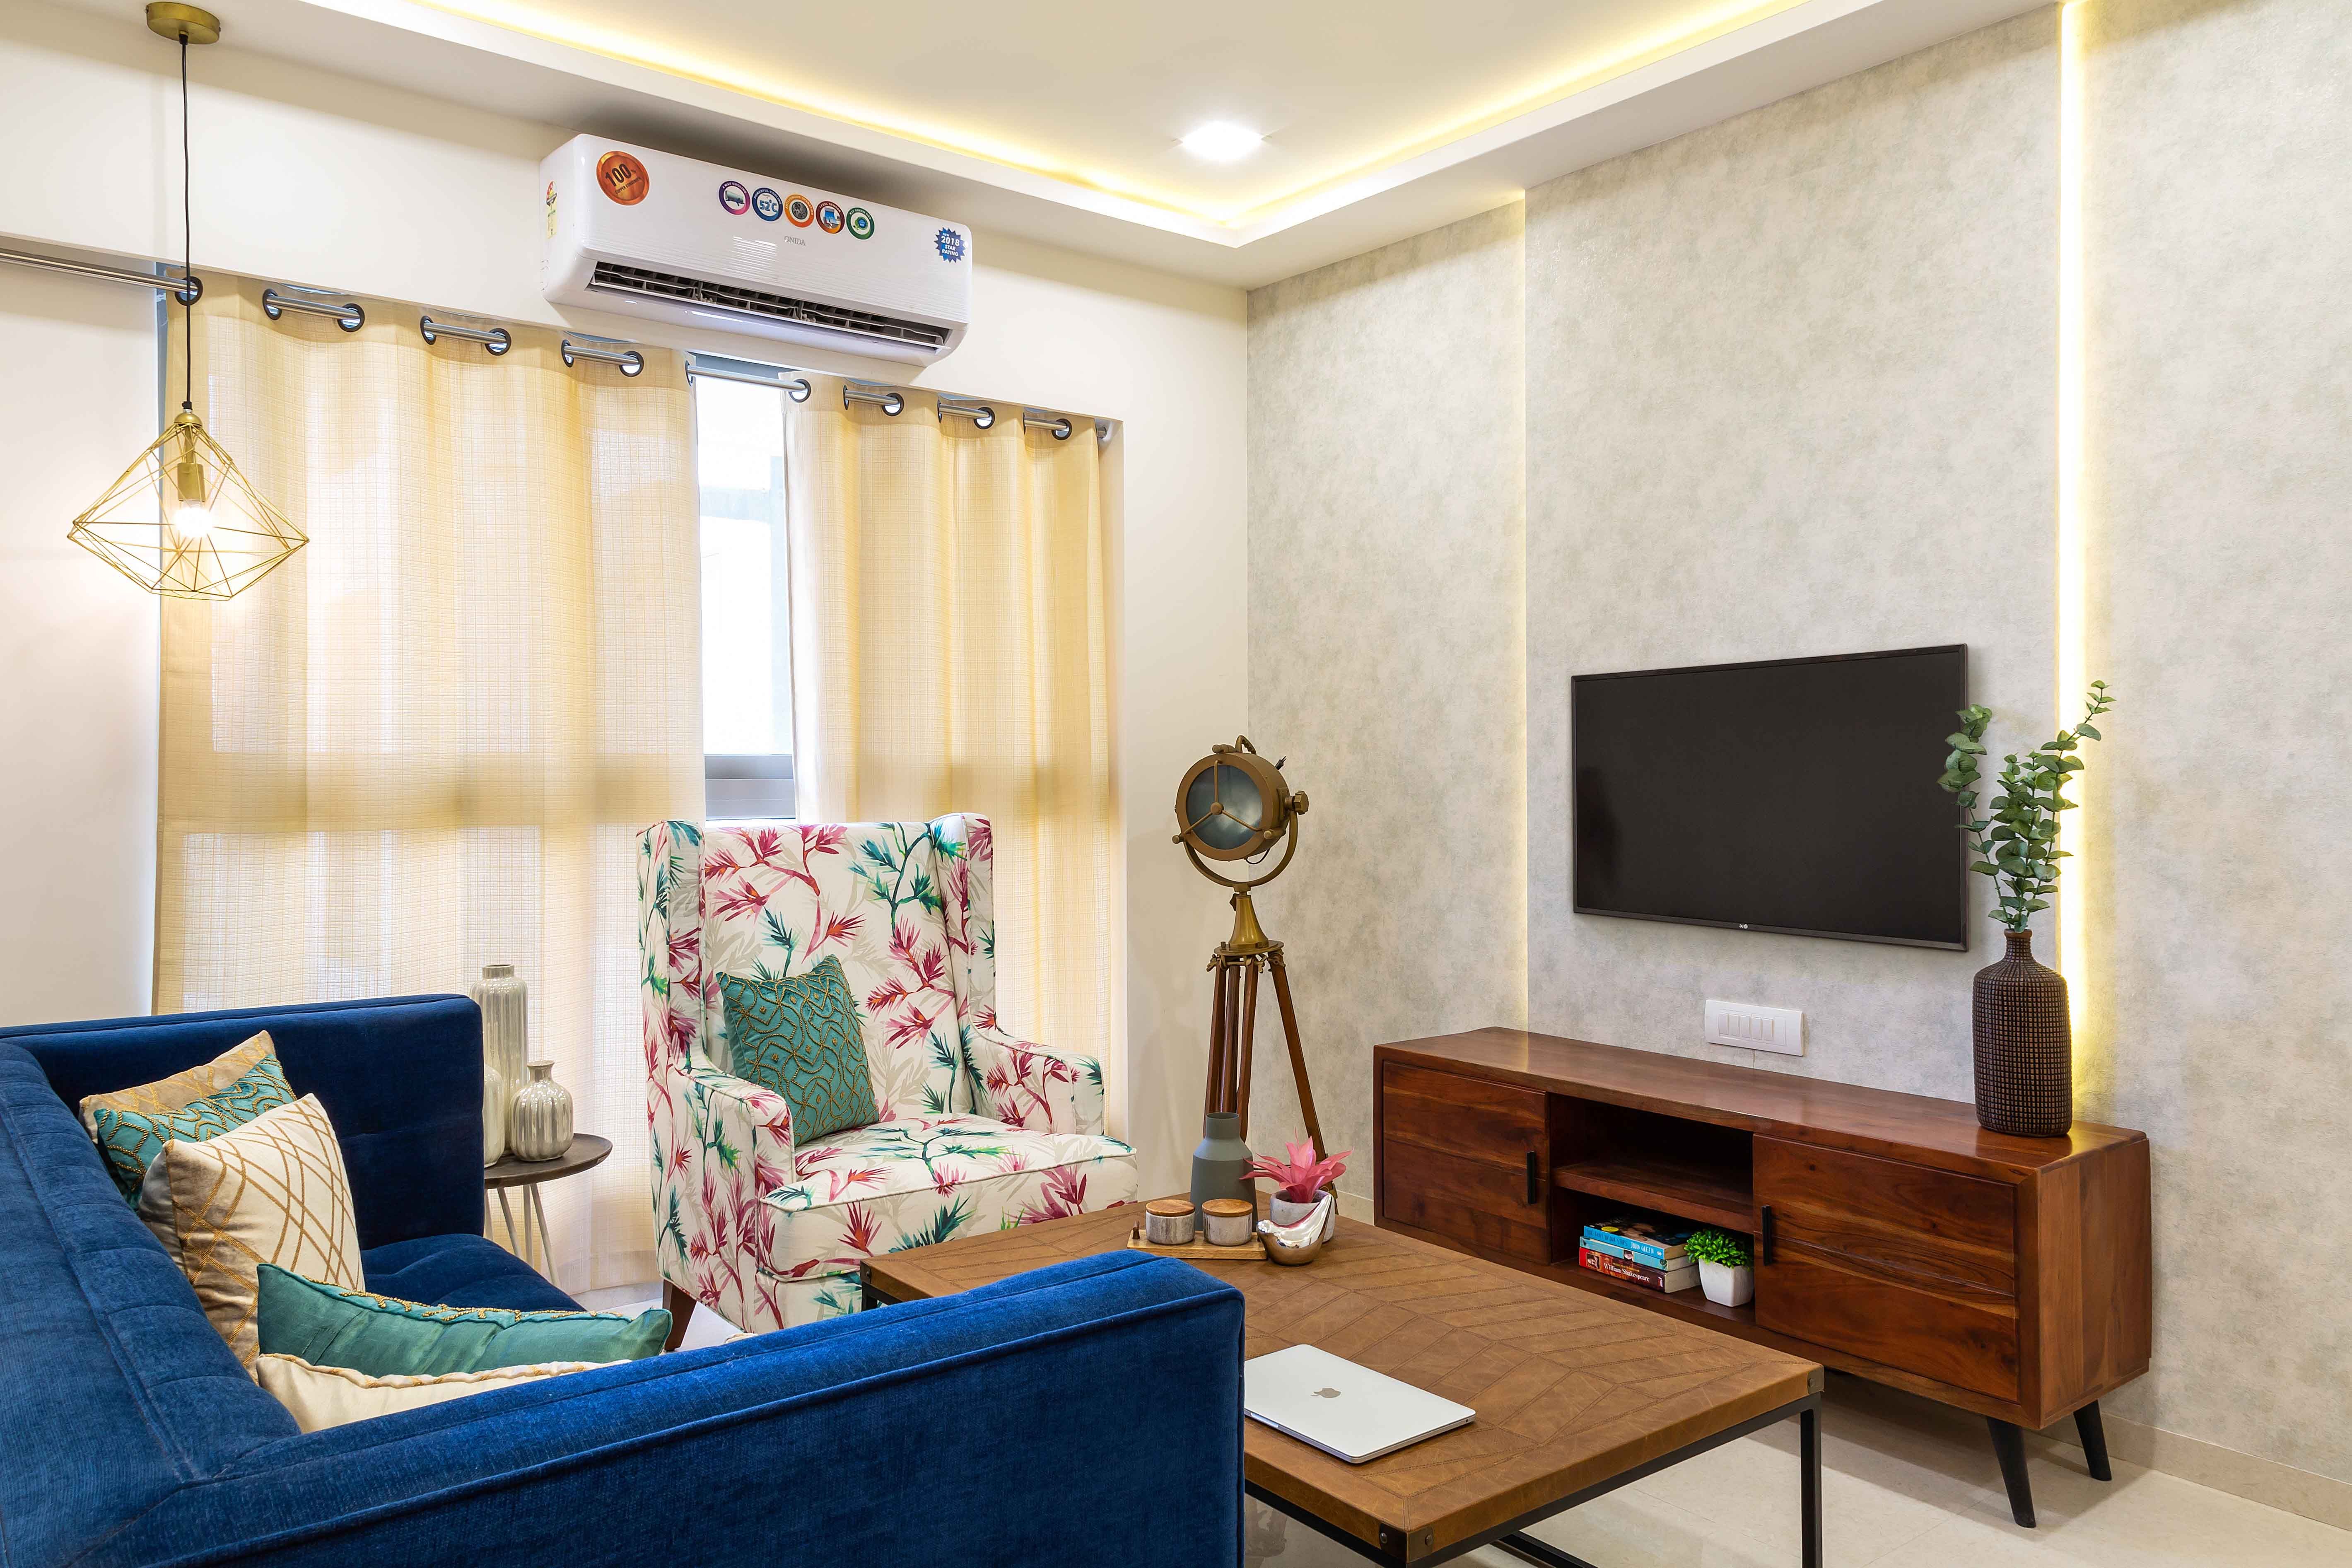 Modern 2-BHK Flat In Mumbai With Blue Seater And Accent Chair